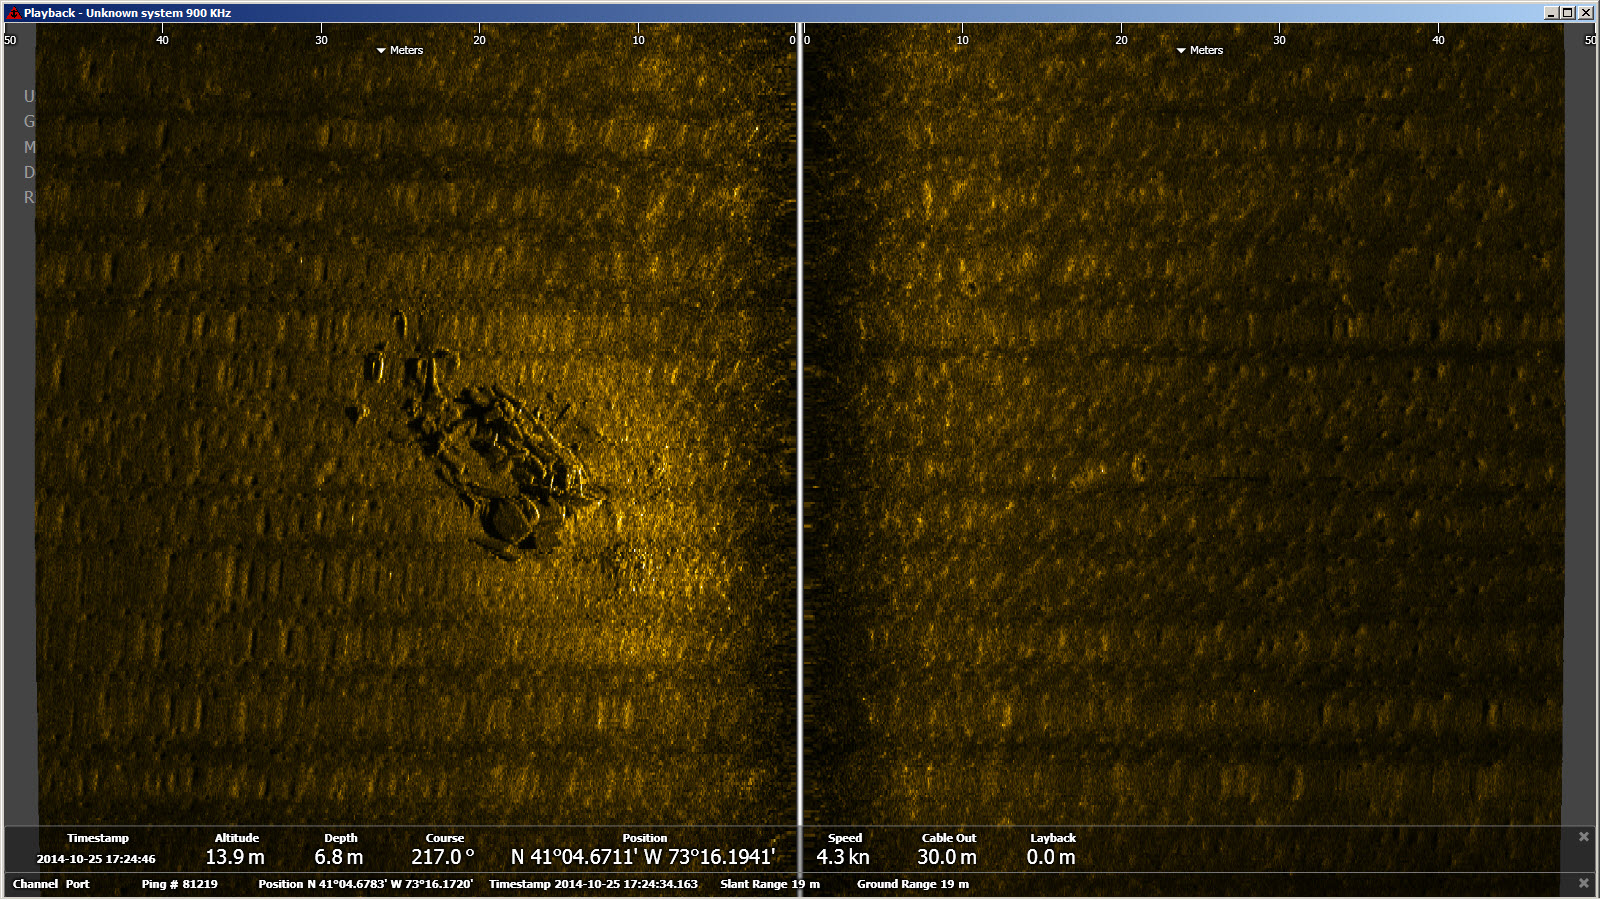 Statistics comparing the Deeper sonar, SS510 sonar, and ground truth